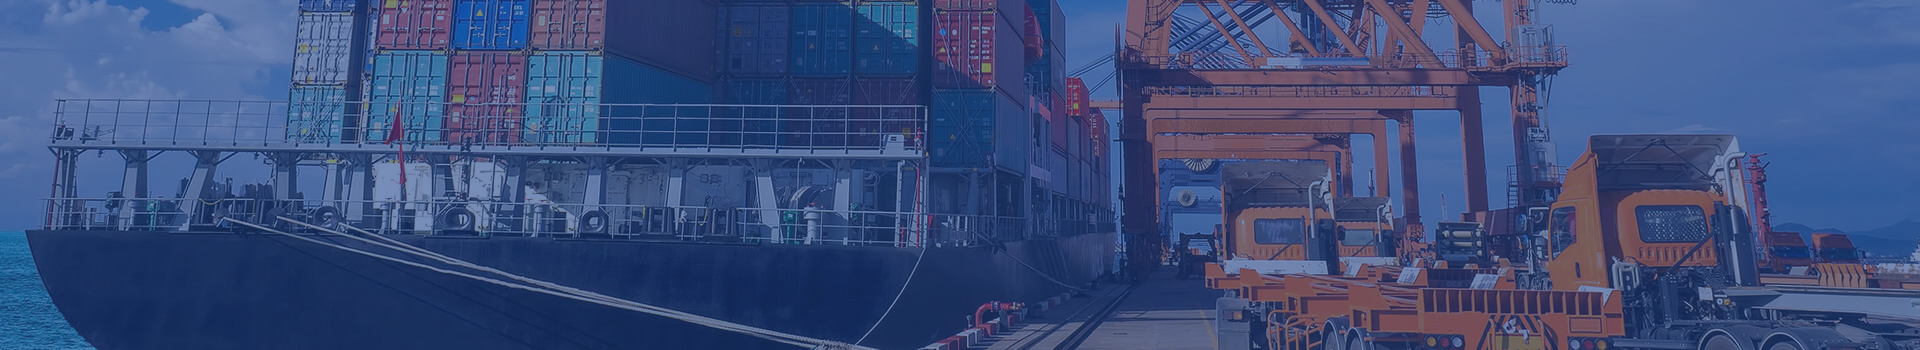 What is the electric amplifier in Ocean Freight?